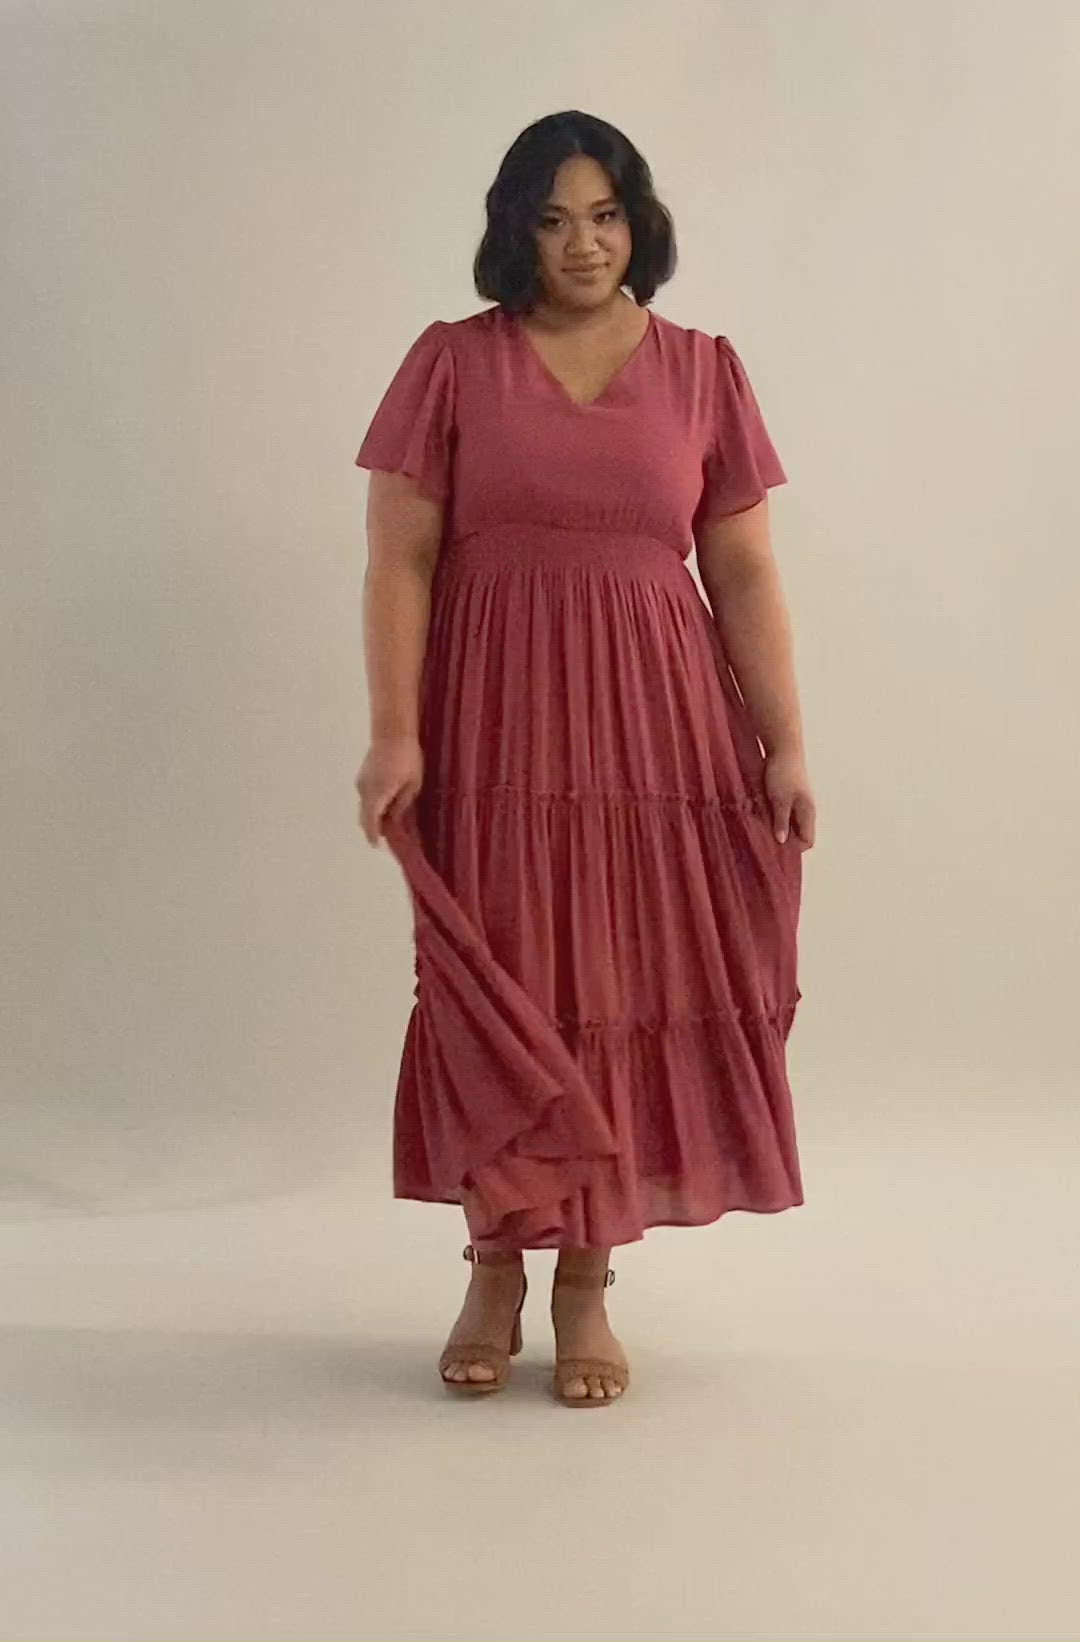 Modest Clothing - Modest Dresses - Modest Bridesmaid Dresses. Modest Clothing - Modest Dresses - Modest Bridesmaid Dresses Video of the faded rose smocked waist tiered midi dress. 